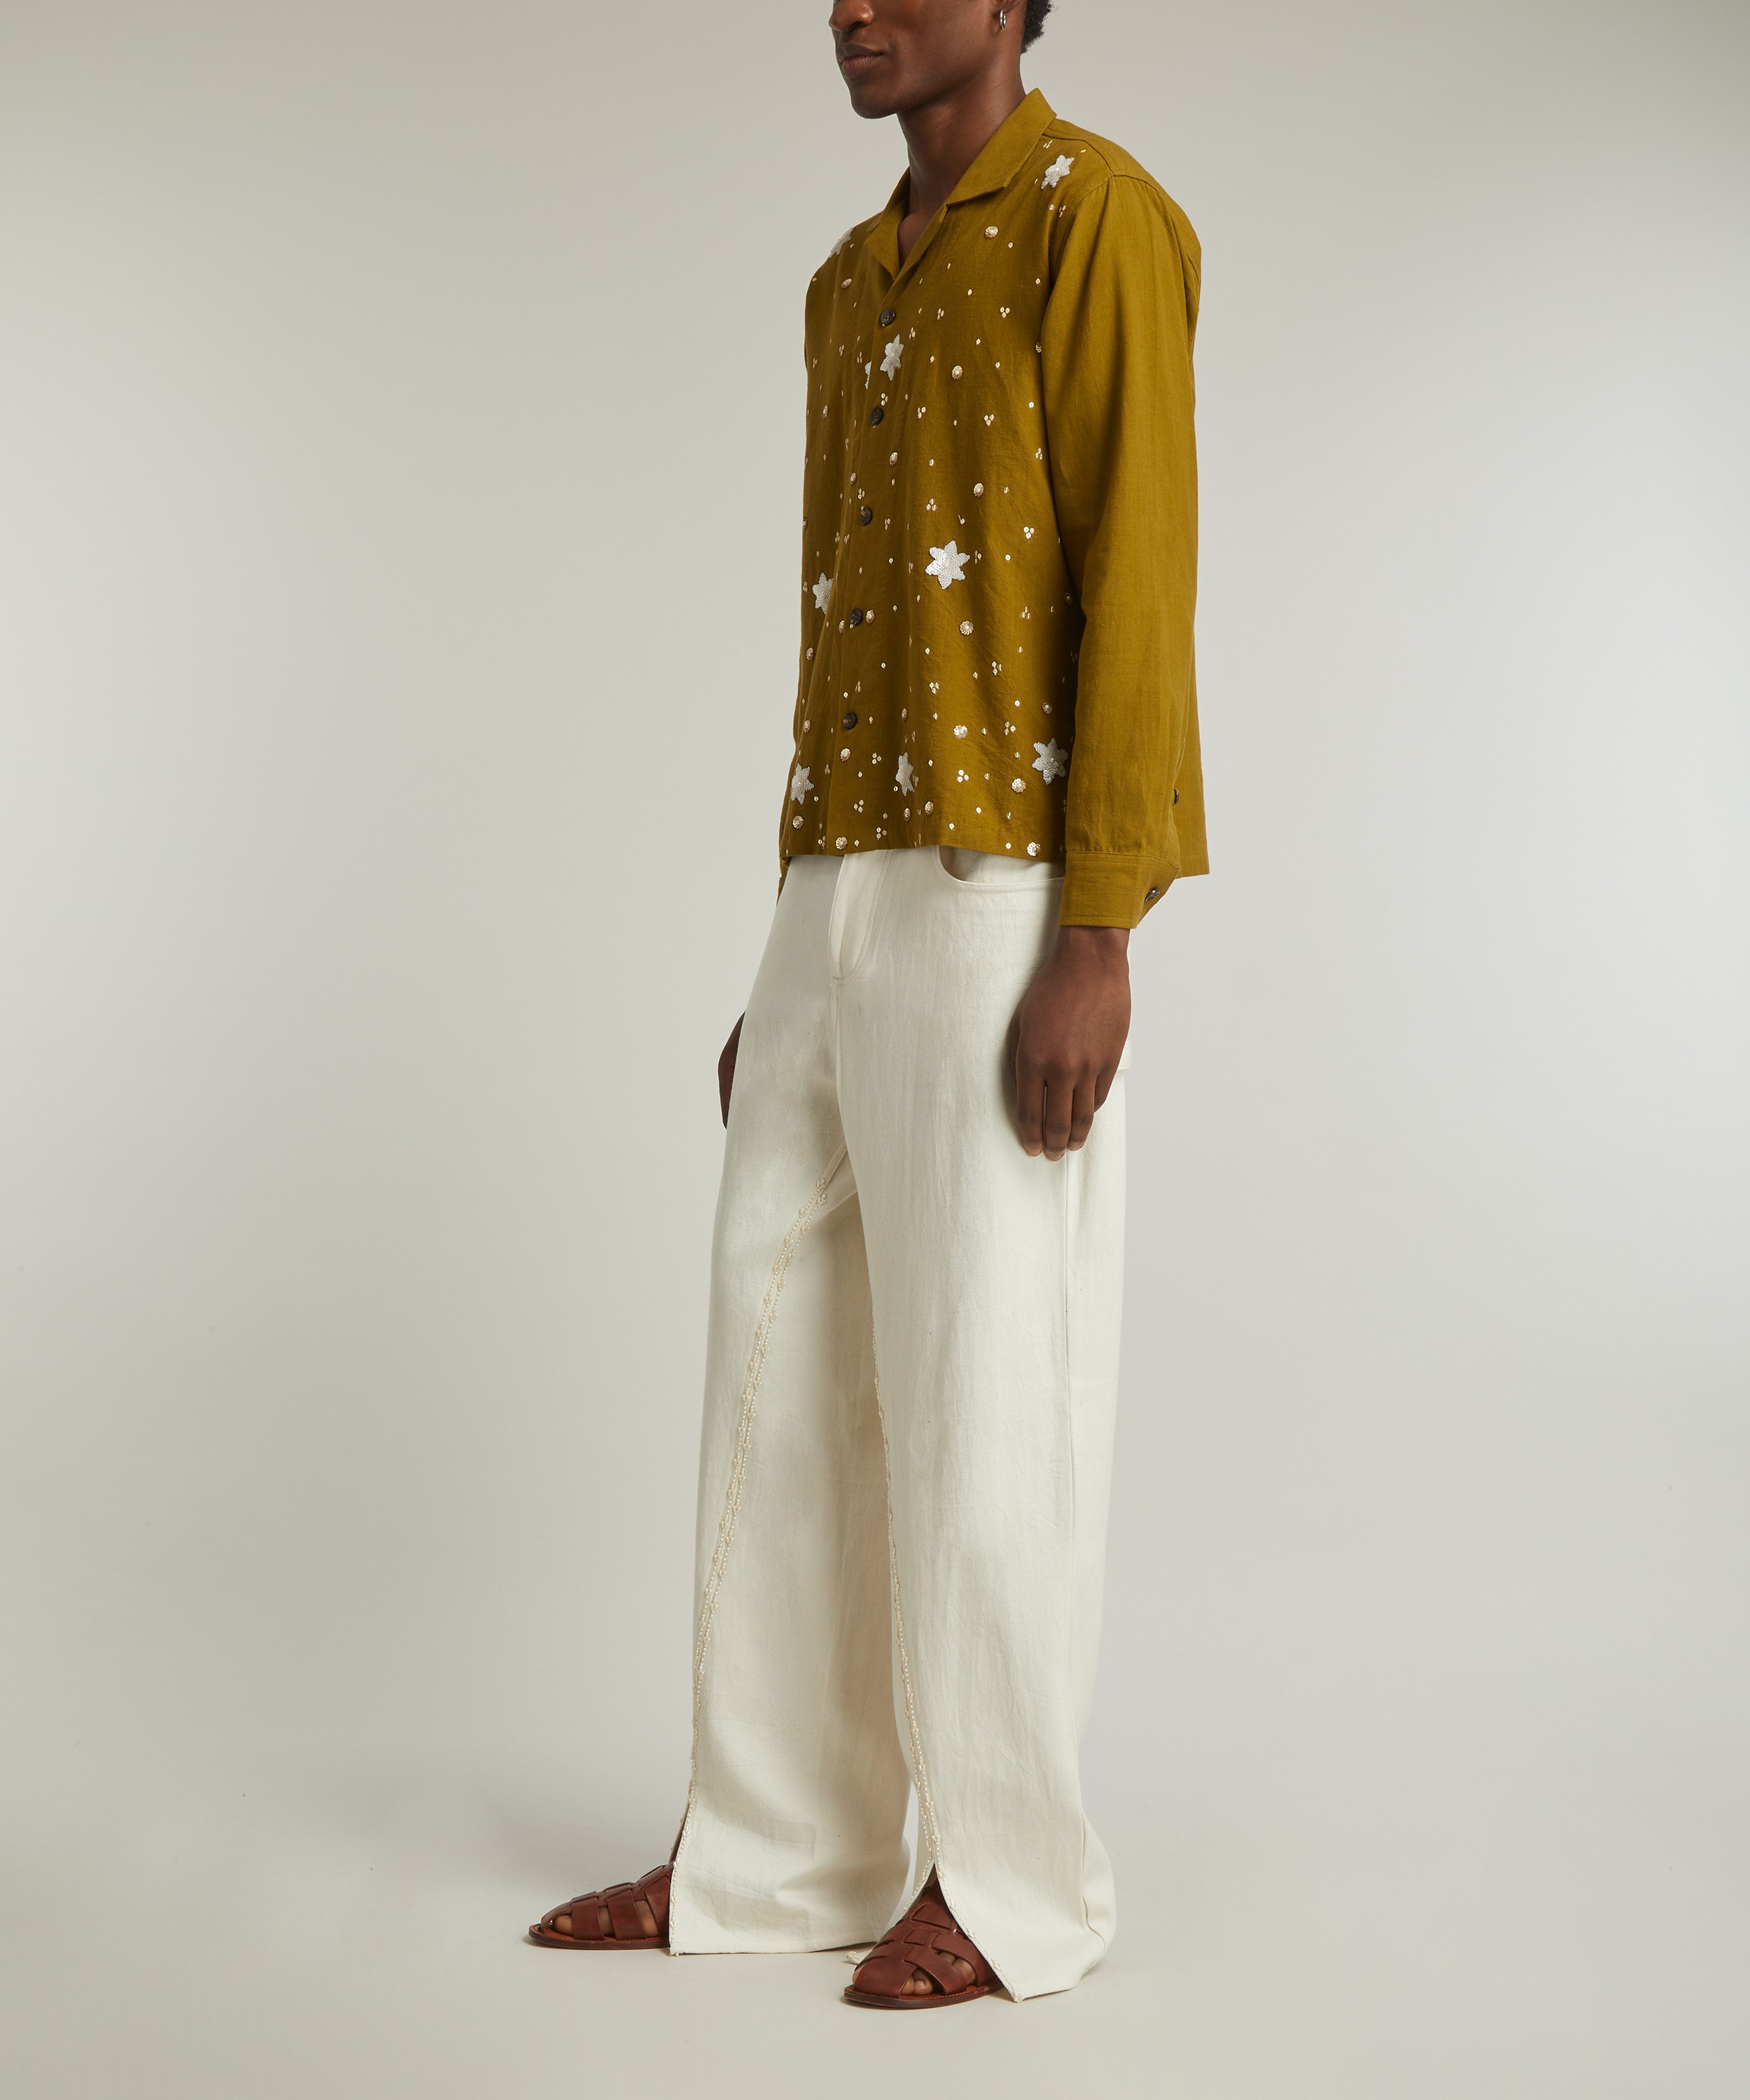 Kartik Research - Hand Embroidered Flowers Long-Sleeve Shirt image number 1